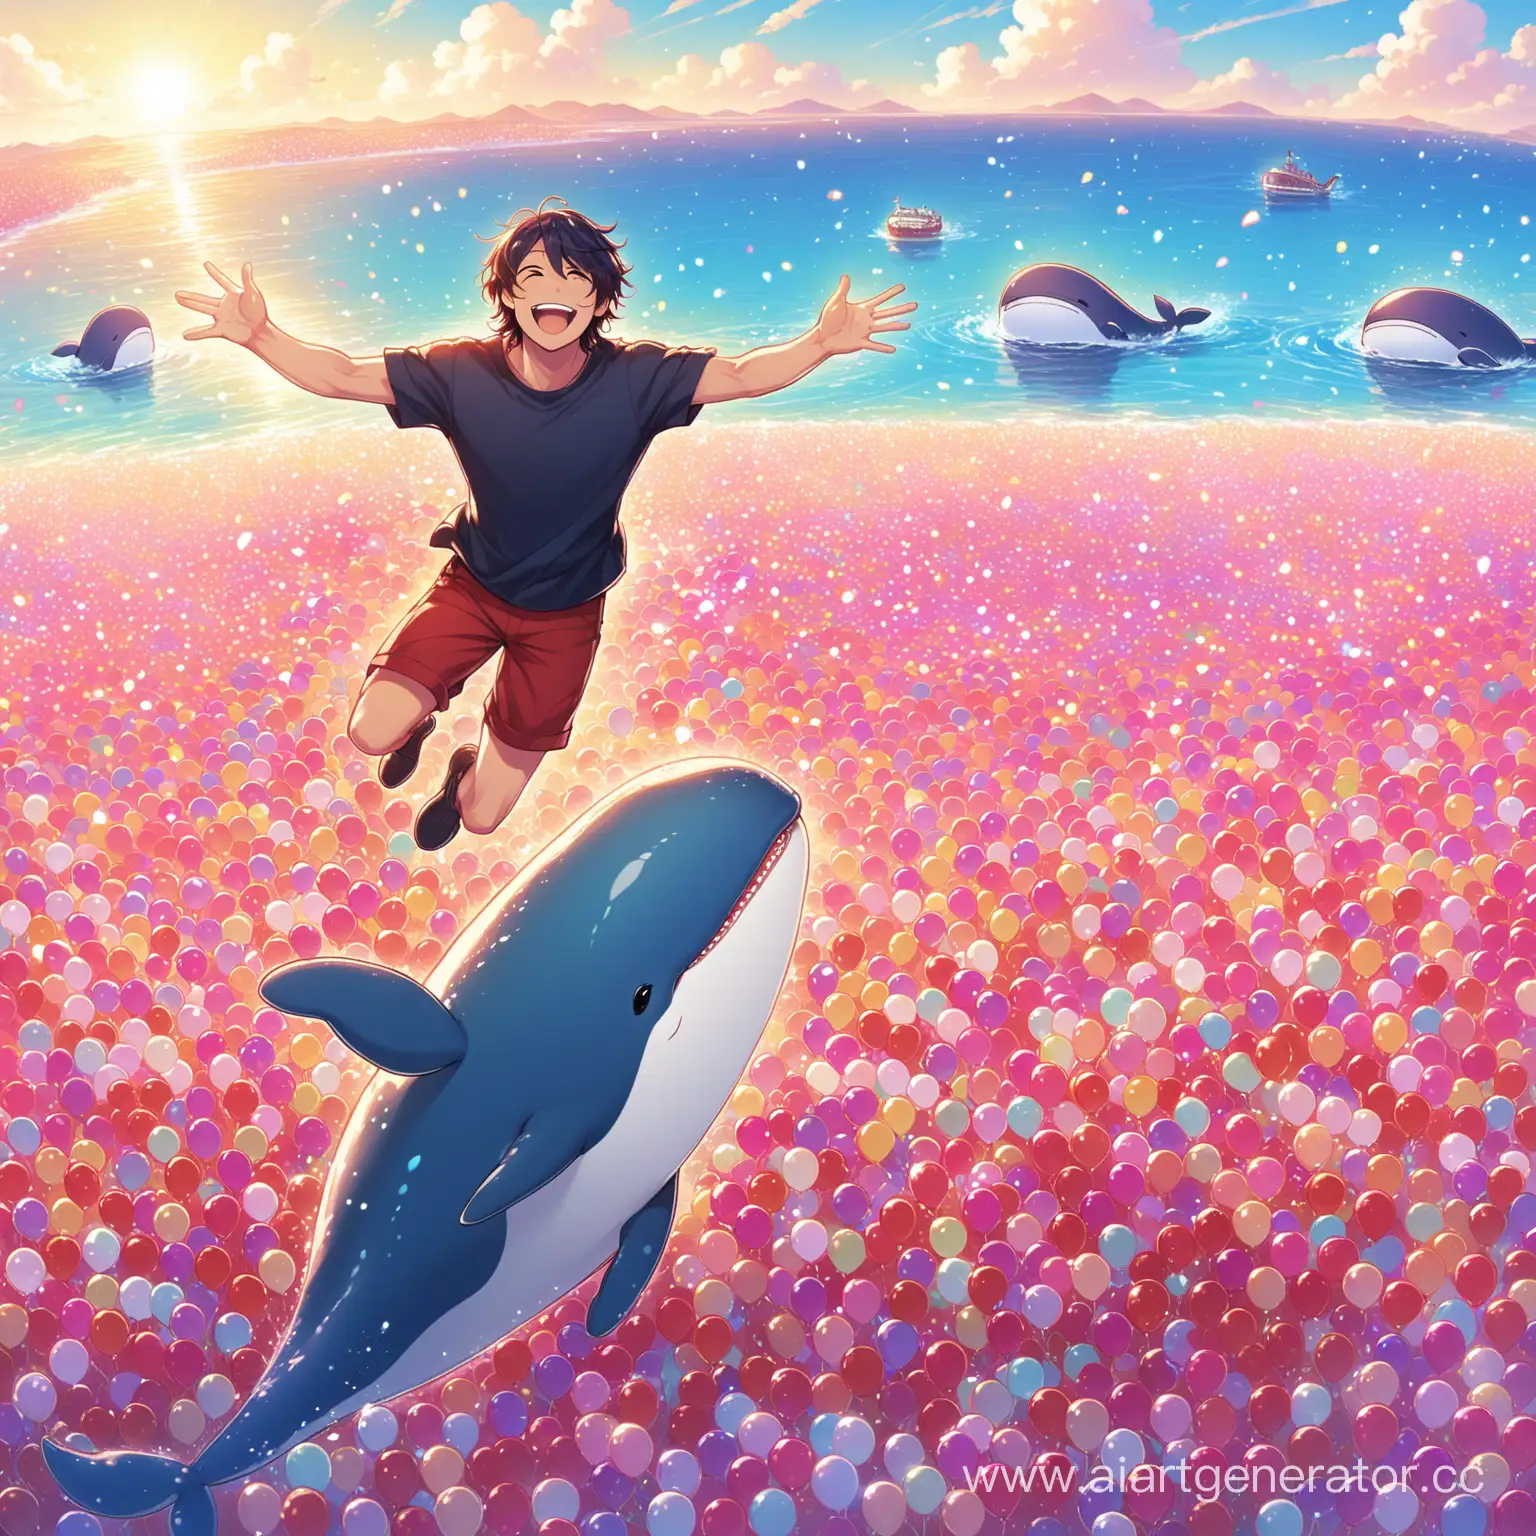 Beloved-Keith-A-Joyful-Whale-Bringing-Happiness-to-Thousands